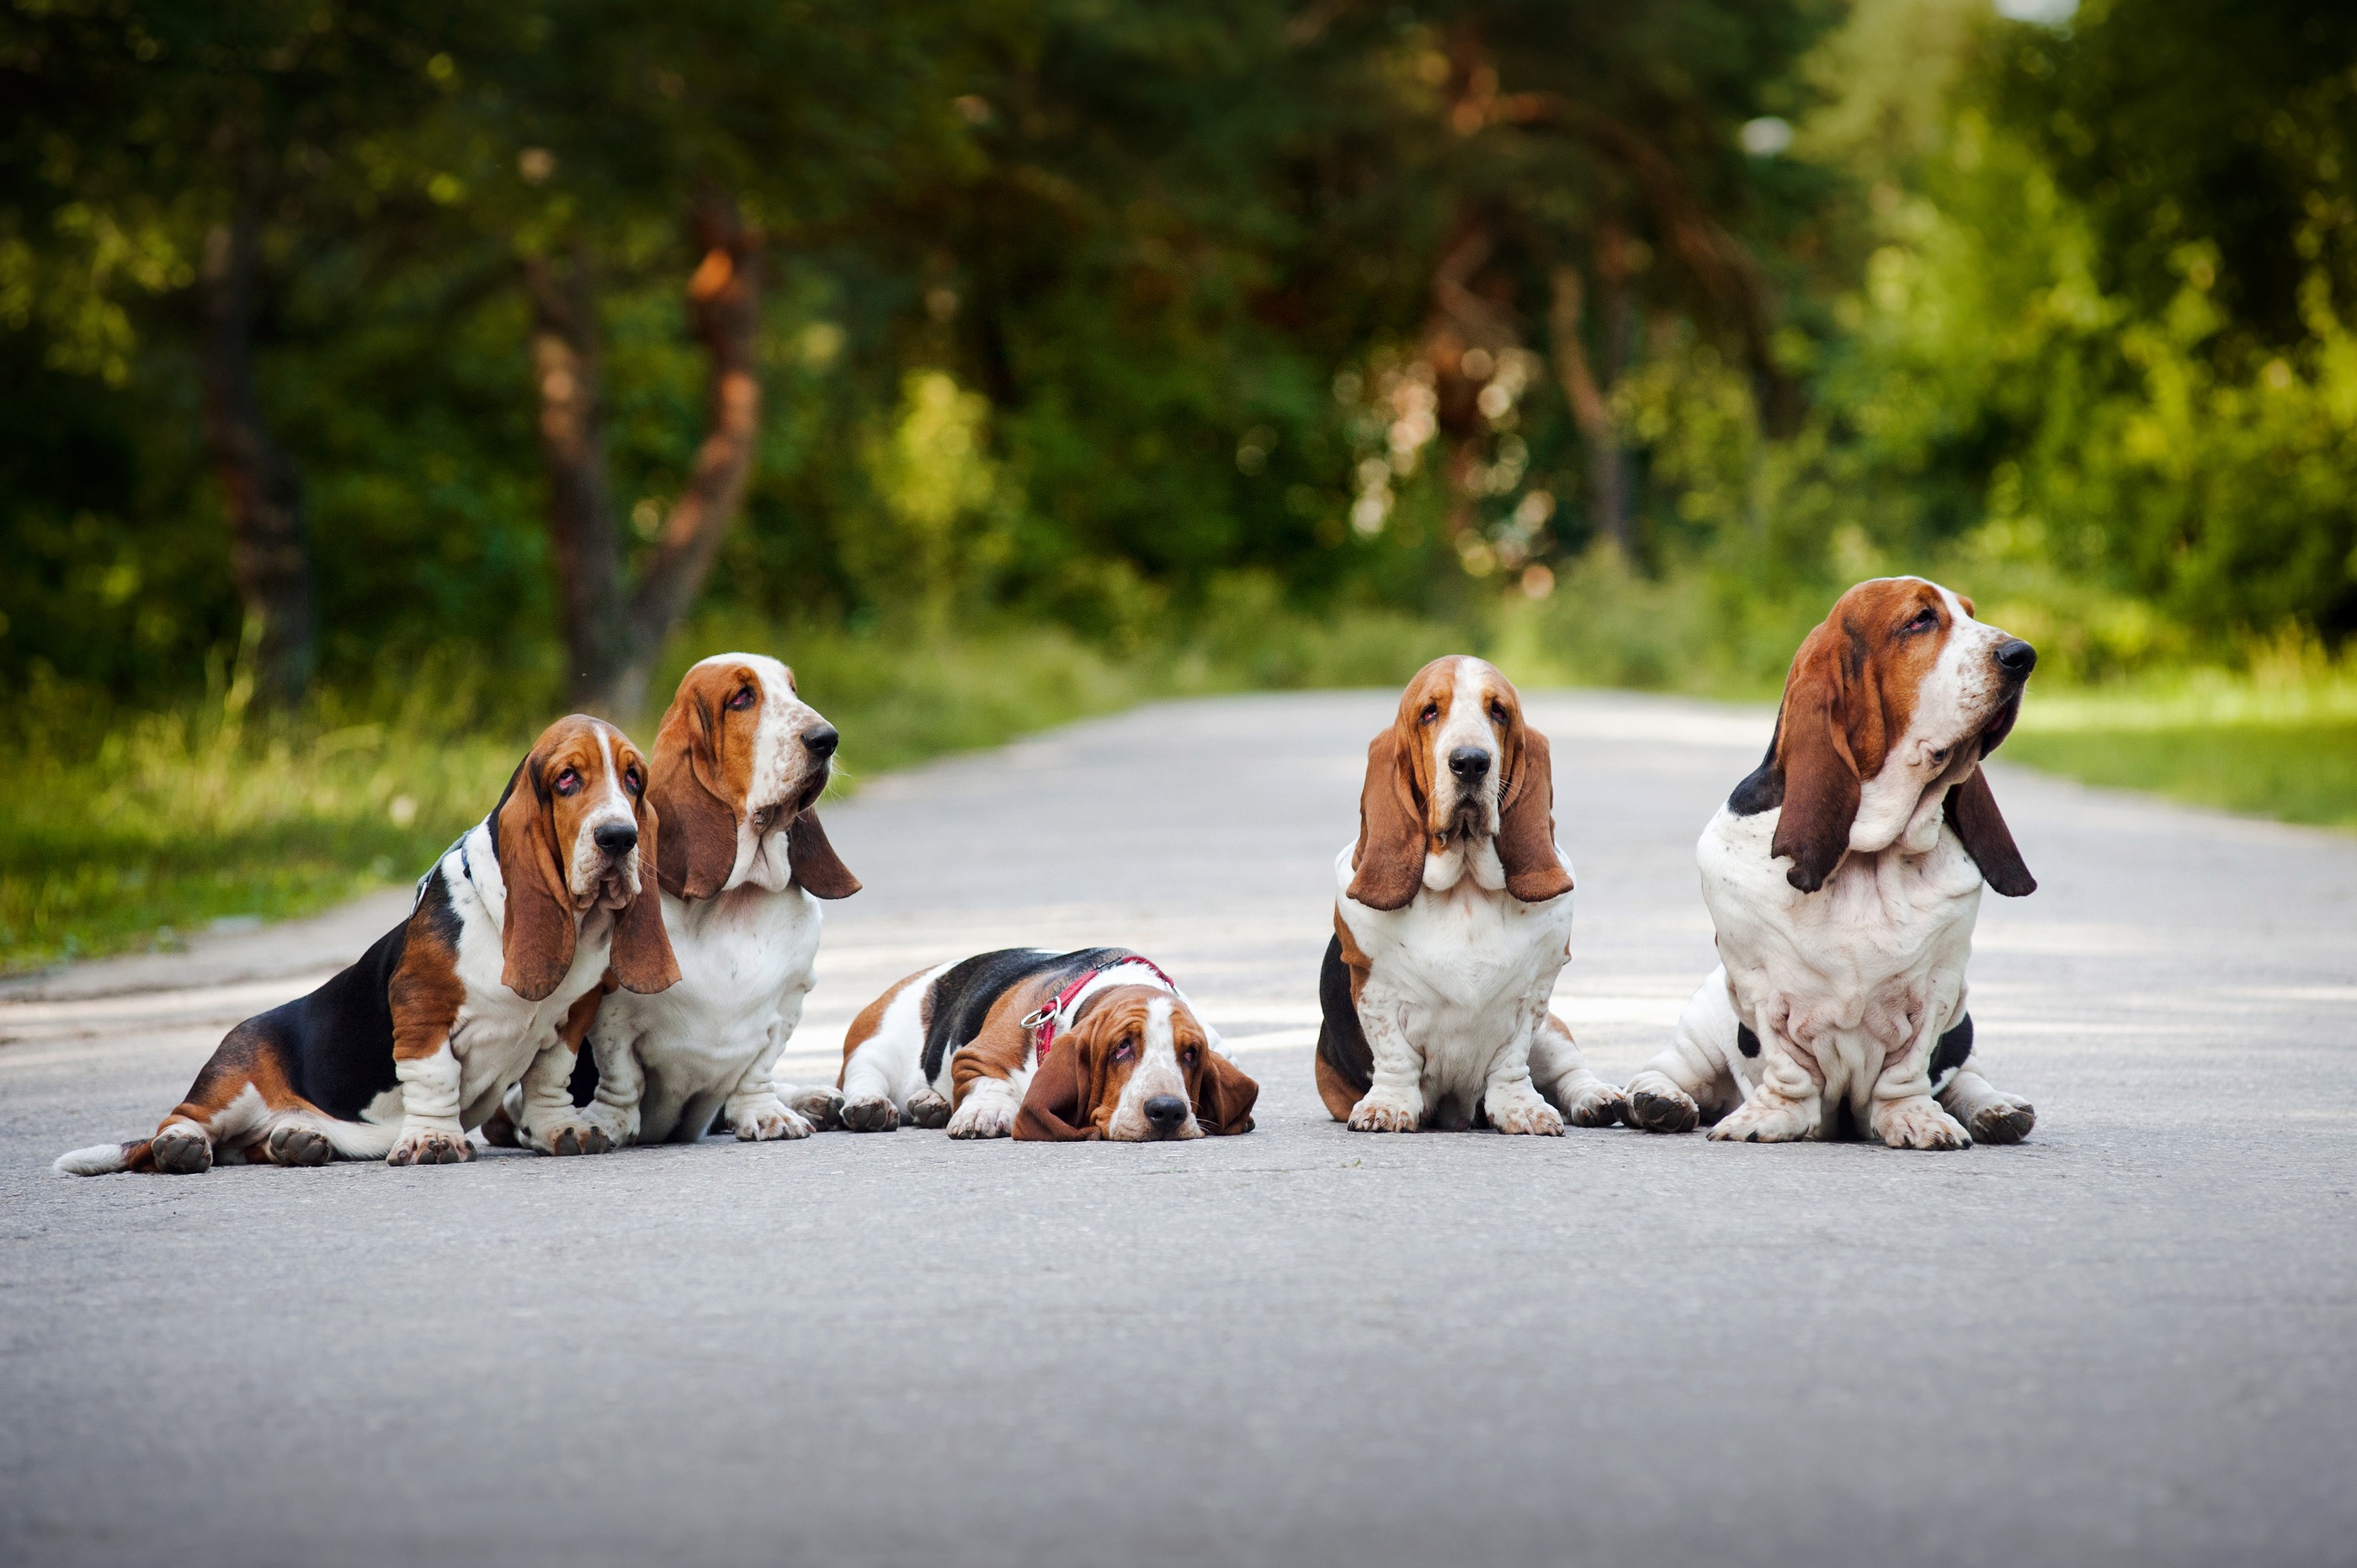 Animals___Dogs_Family_Basset_Hound_sitting_on_the_road_049589_-1